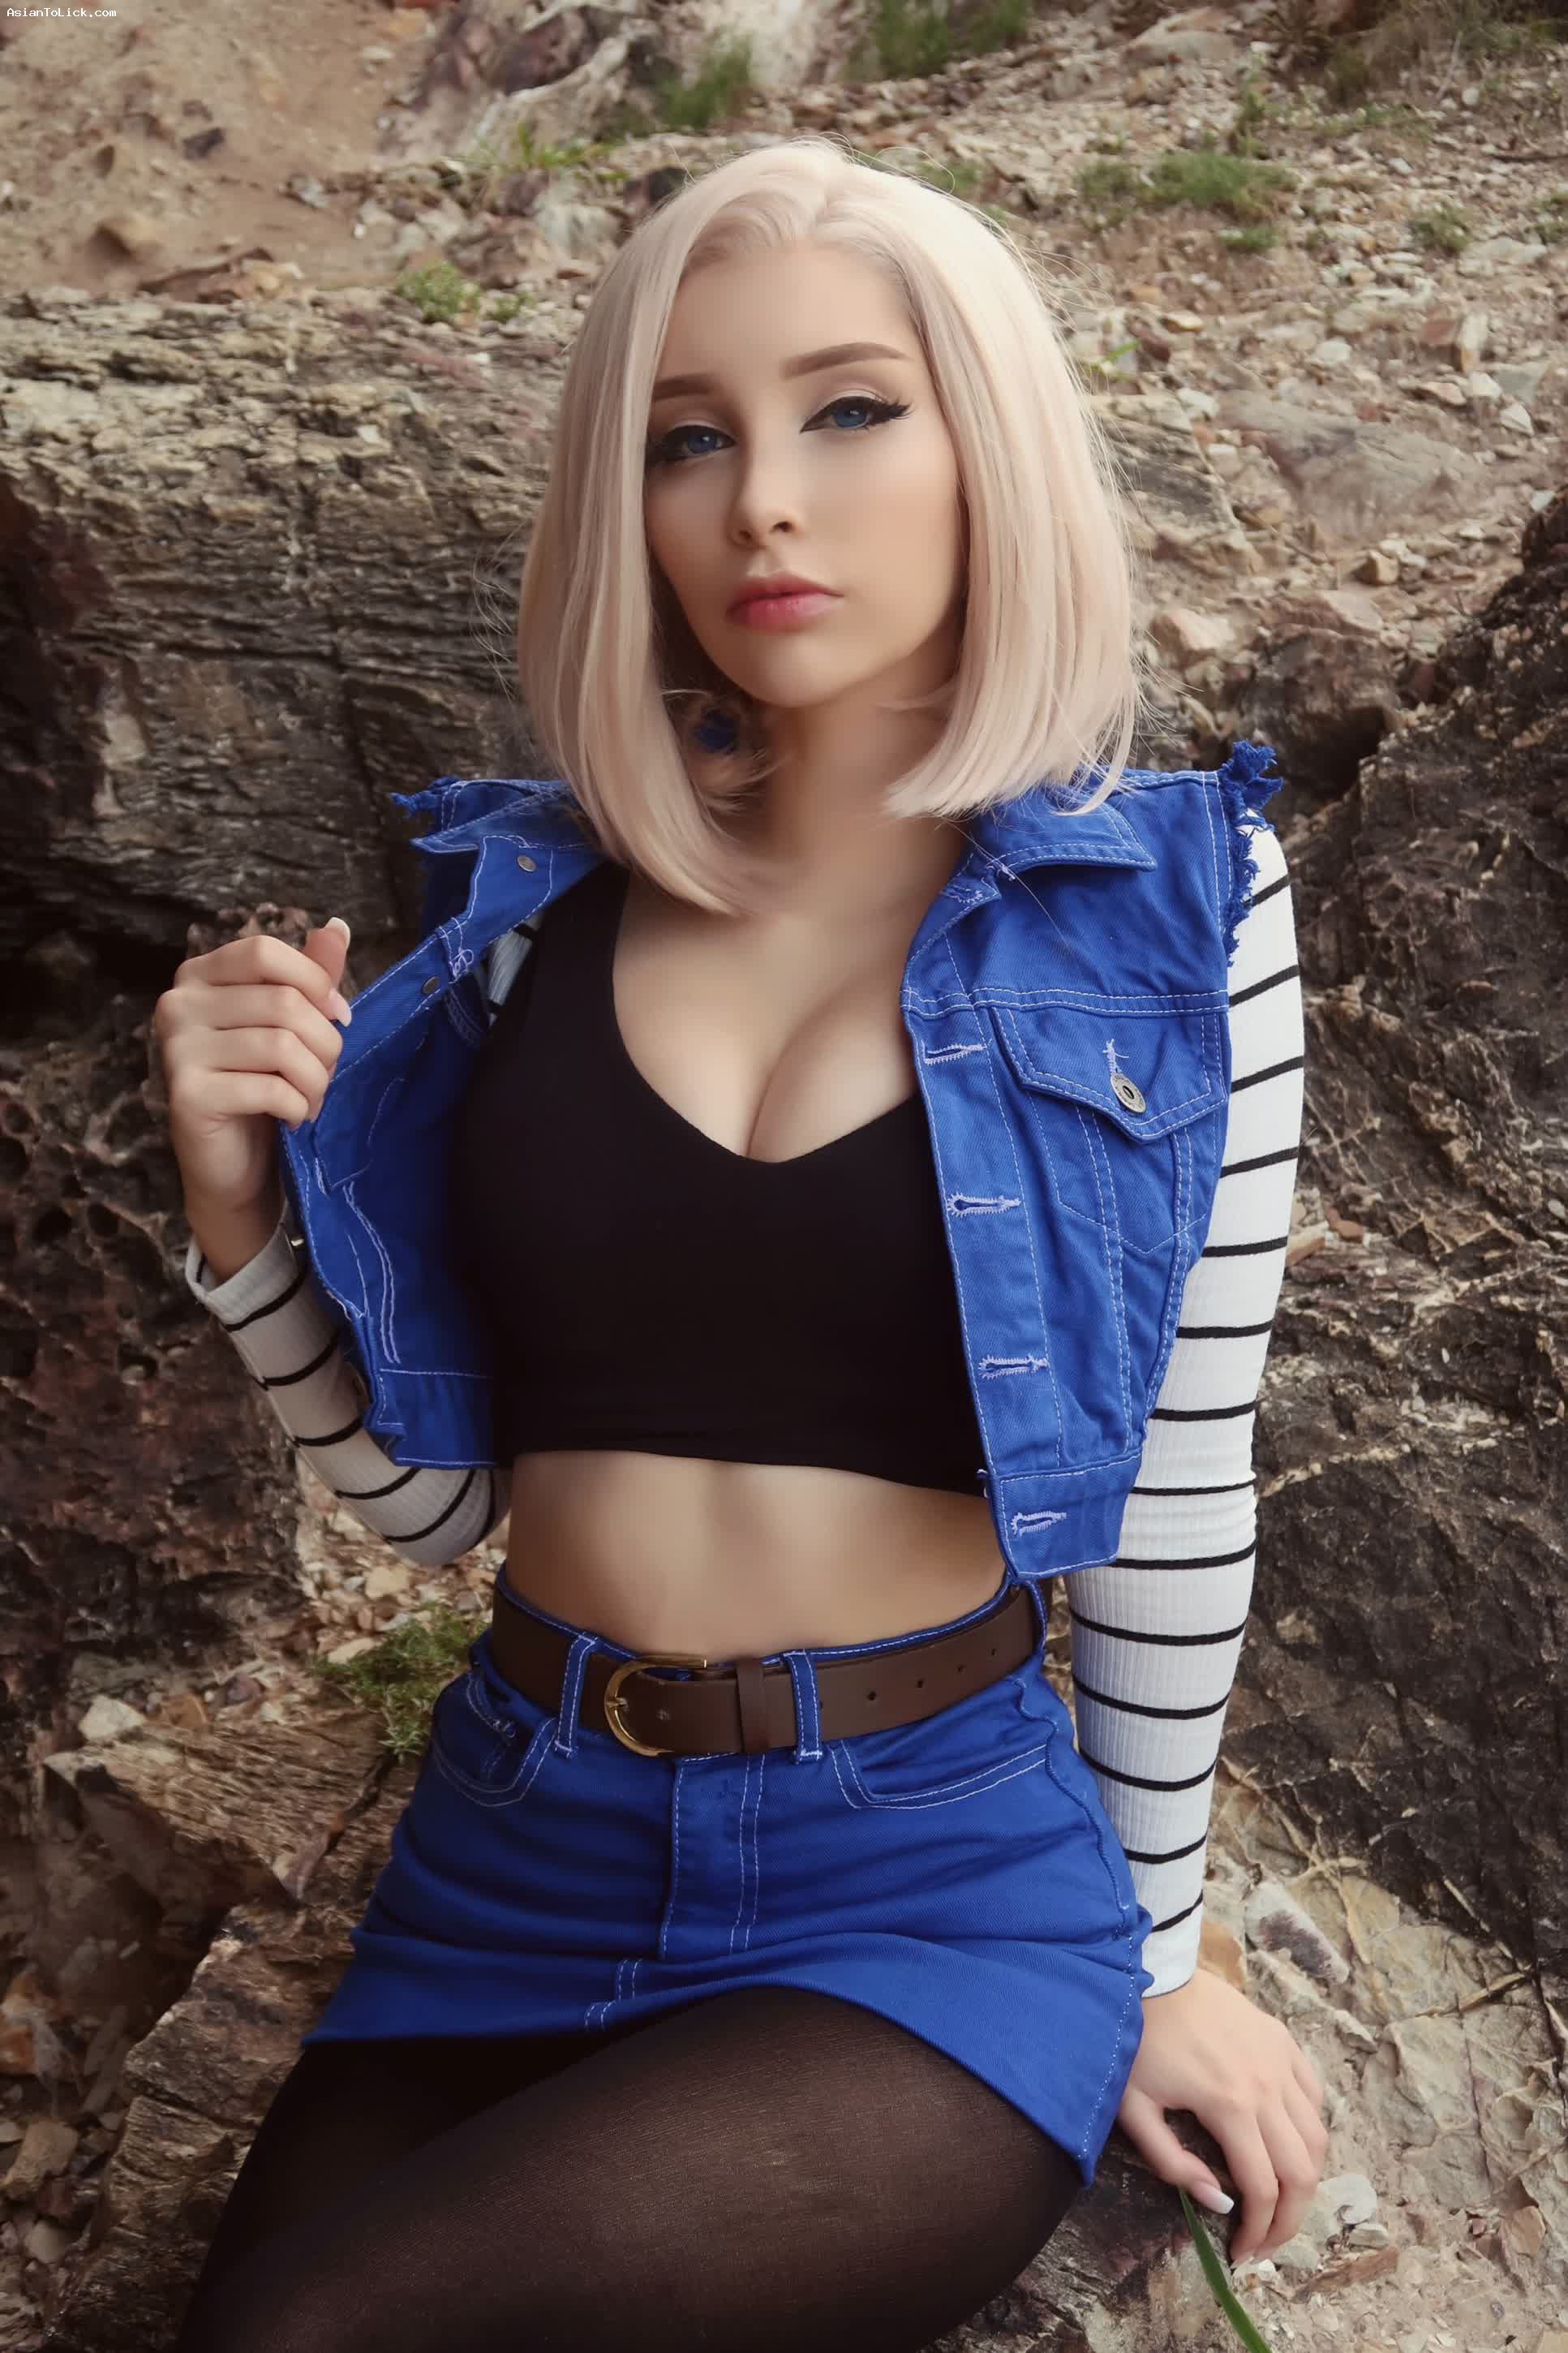 Android 18 Cosplay by Beke Cosplay